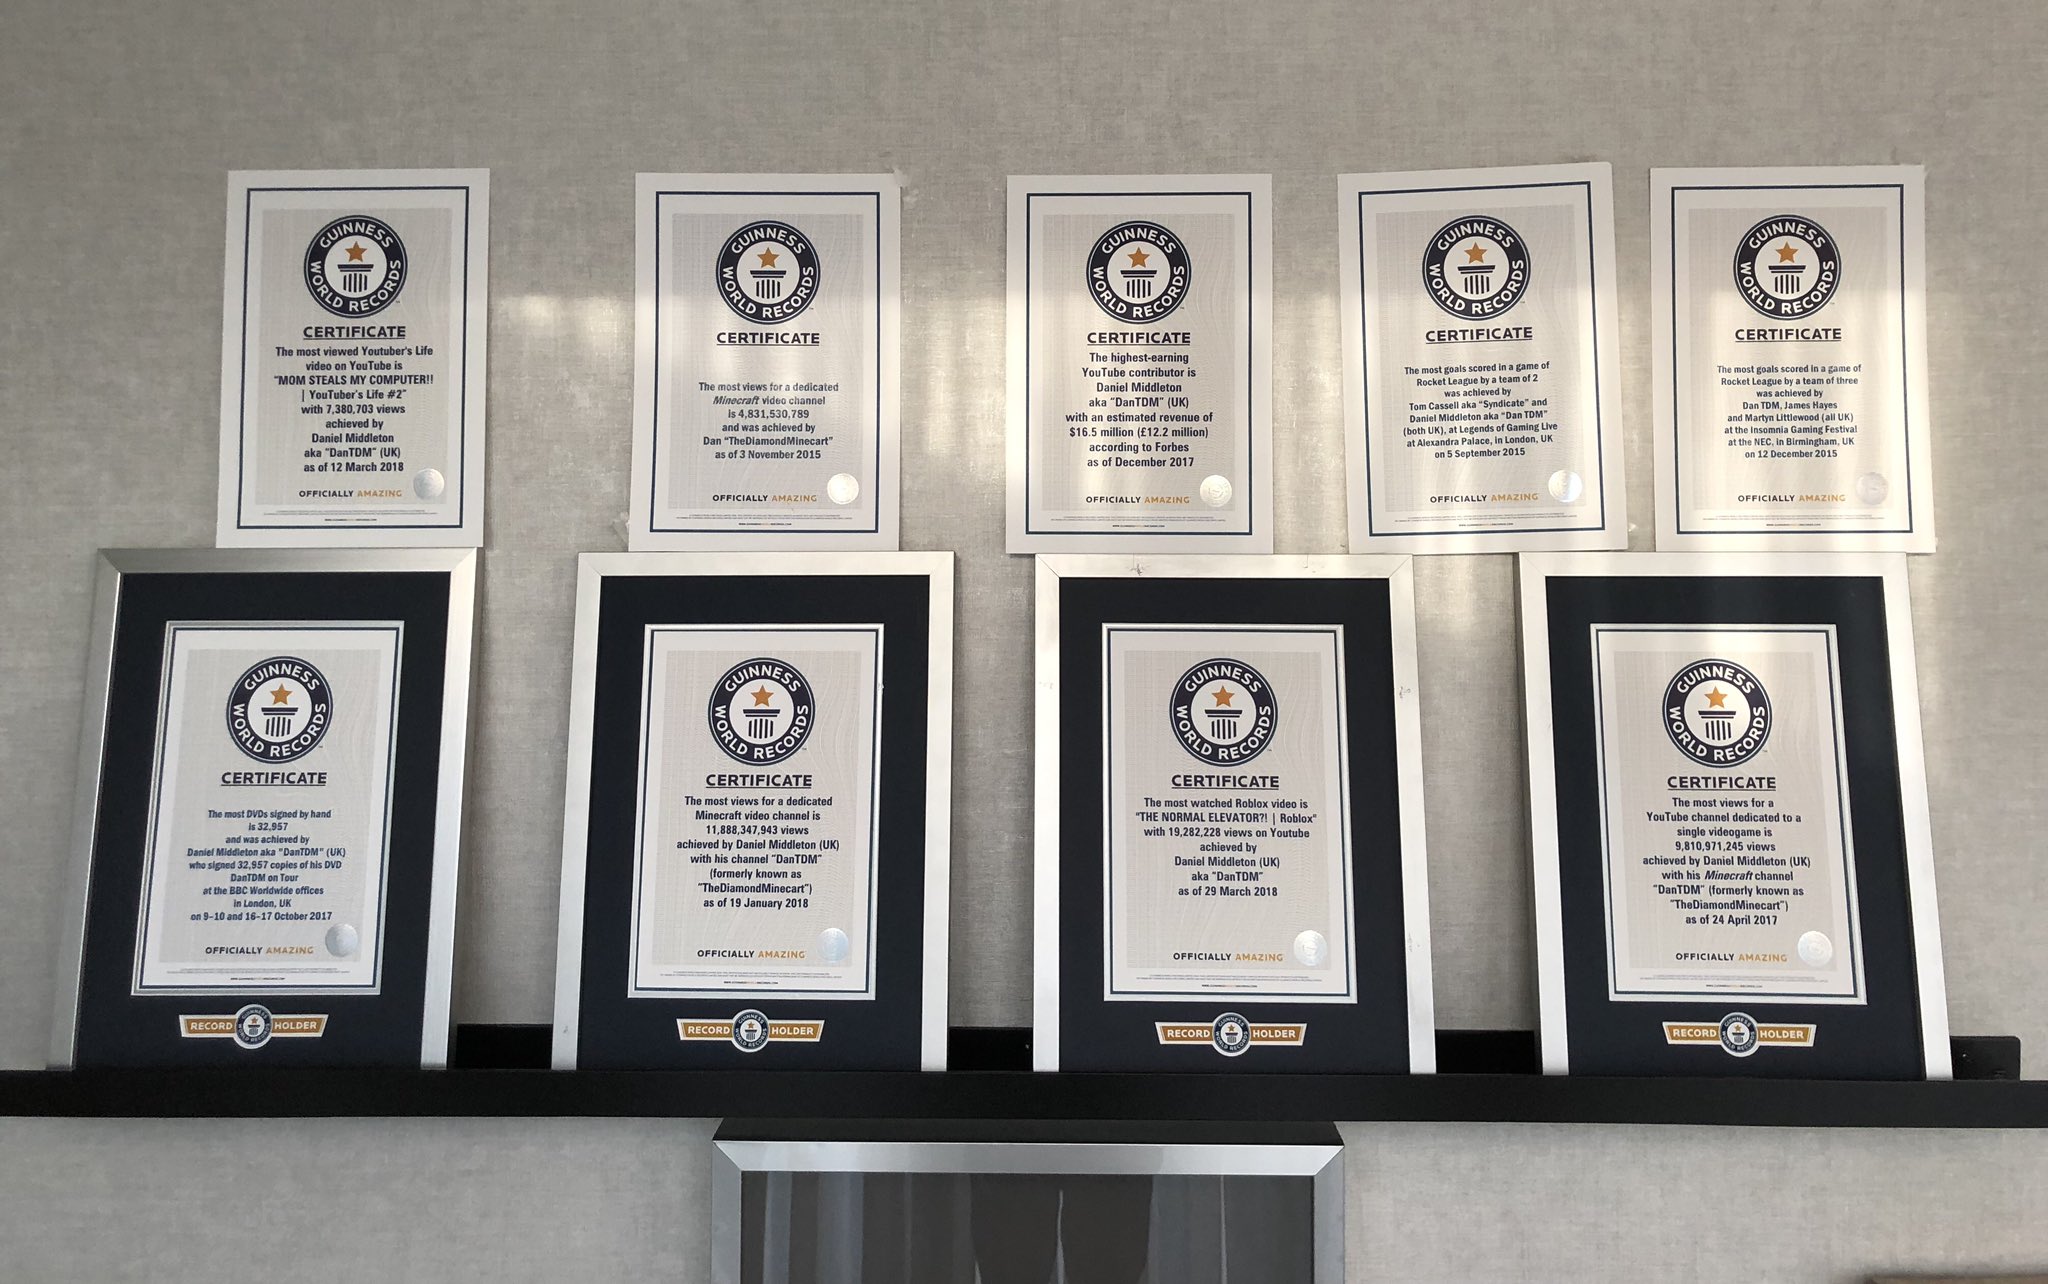 ᴅᴀɴᴛᴅᴍ On Twitter Here Comes A Weird Flex But Okay Got Delivery Of 5 New Guinness World Records Today I Now Have 9 That S Insane Https T Co Uogehmvtl7 - youtbe dantdm roblox the normal elevator